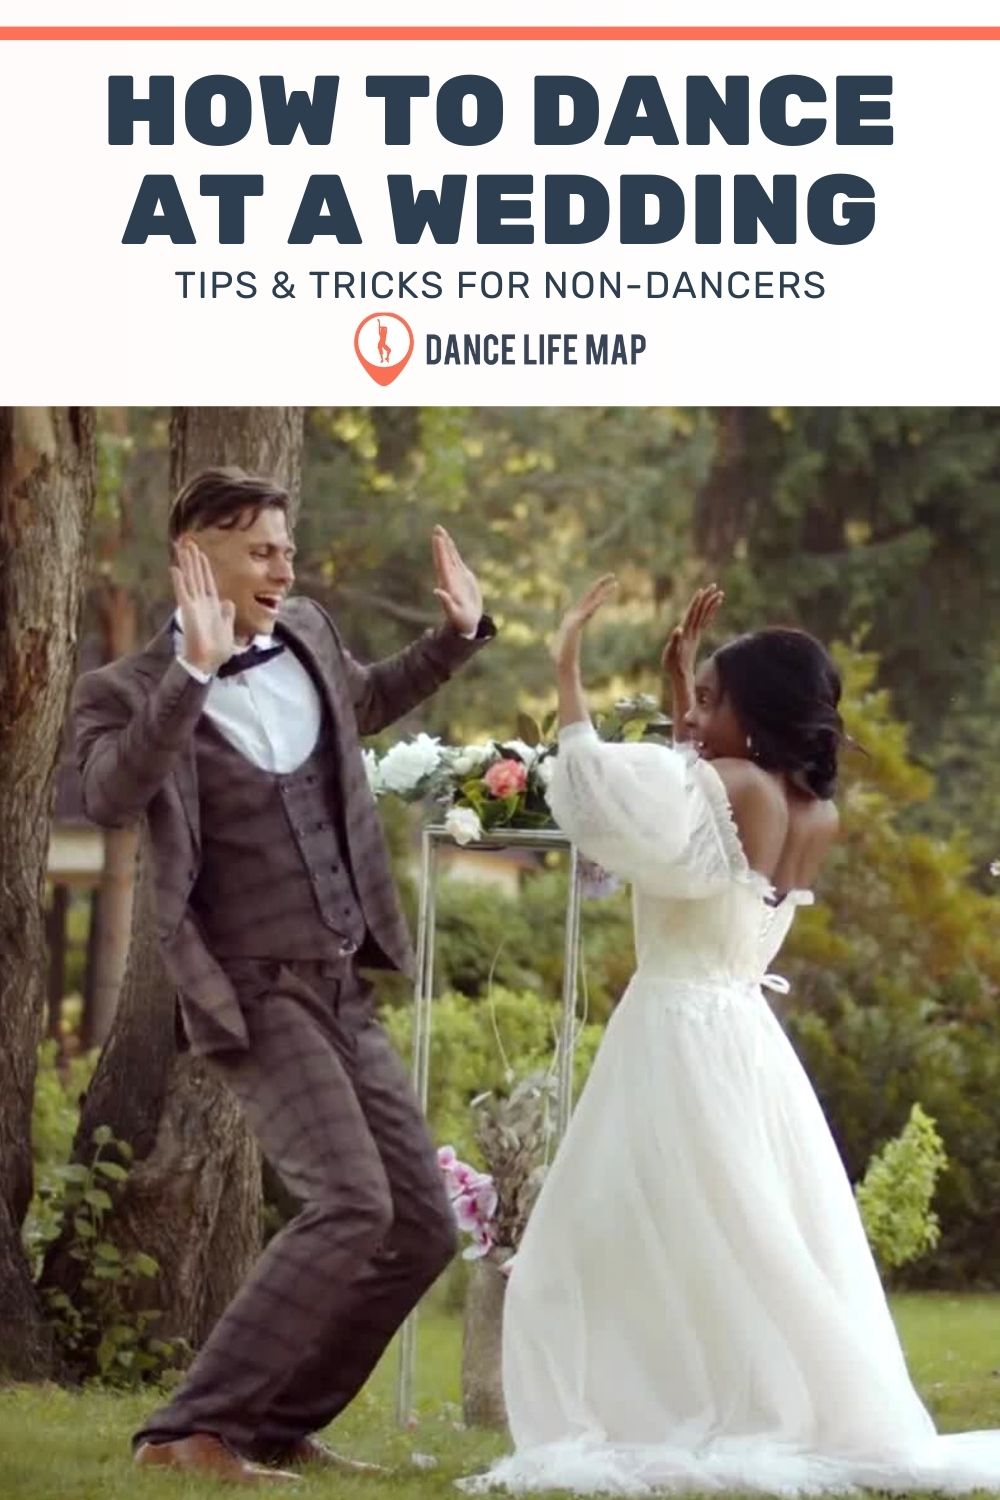 How to Dance at a Wedding Tips Pin